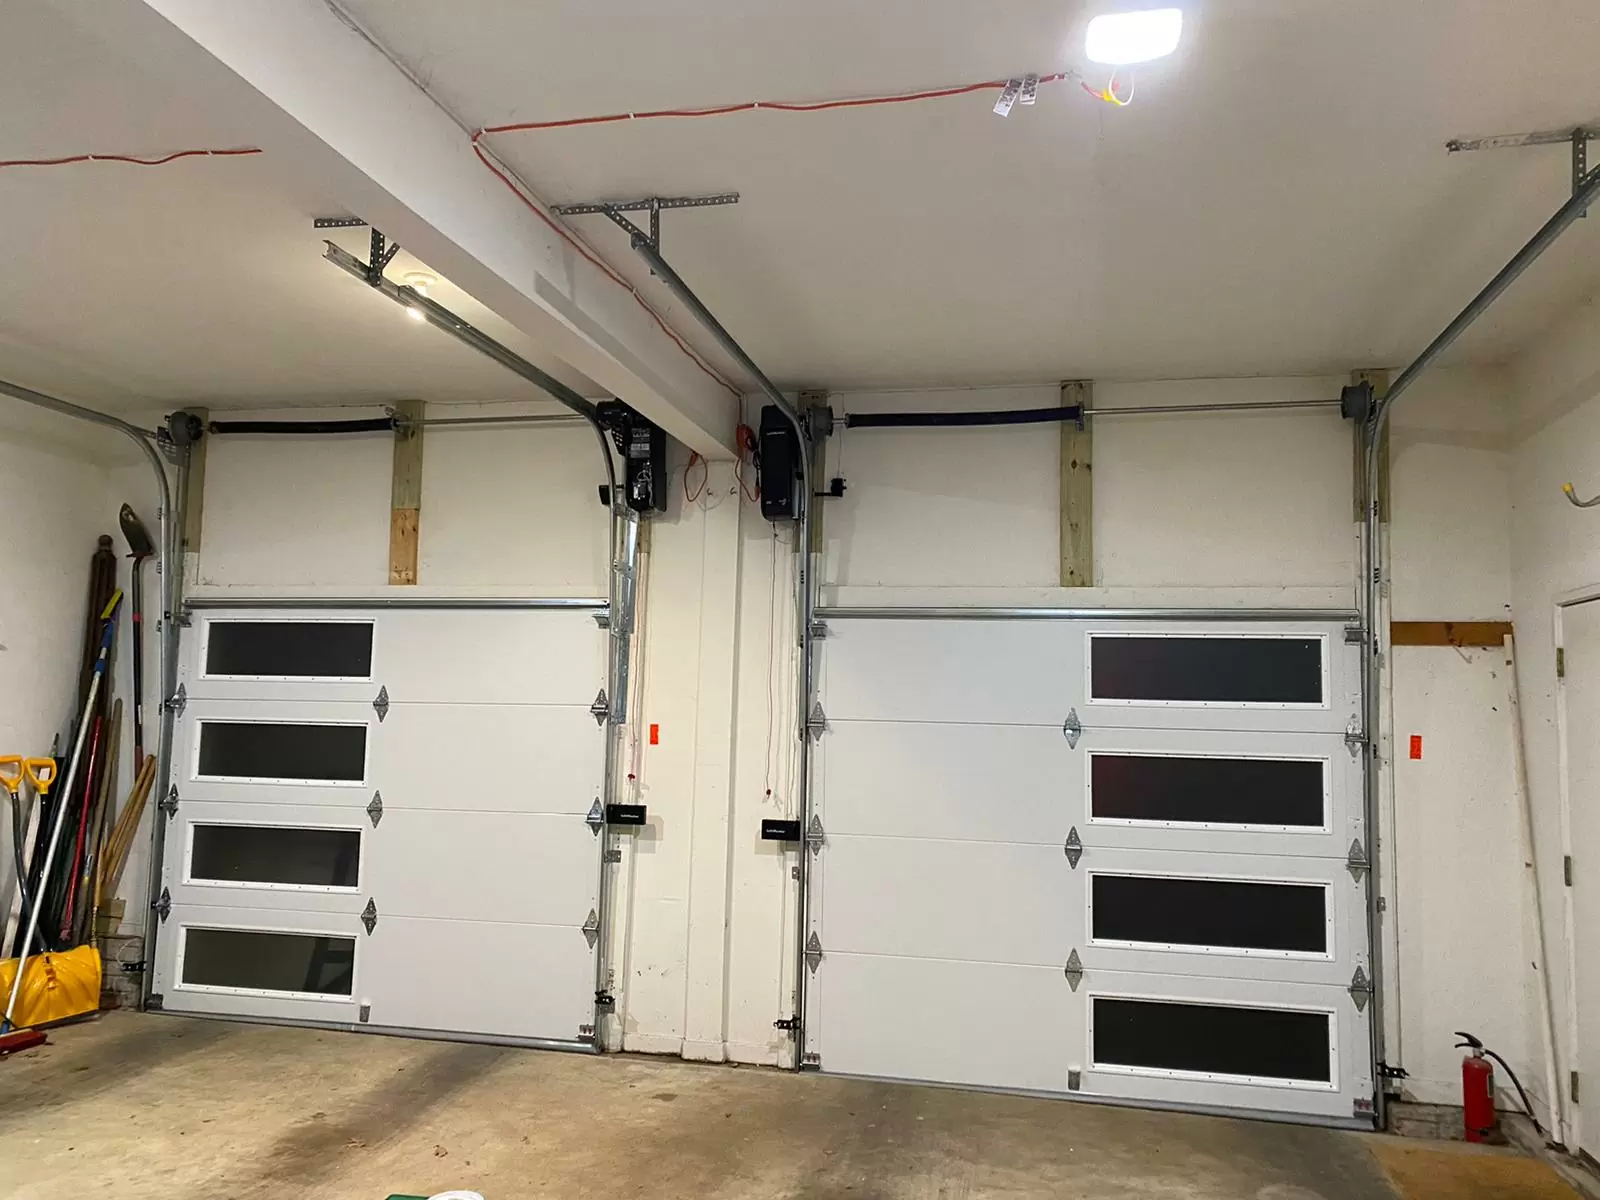 What's the cost of converting a manual garage door into an automatic one? 2